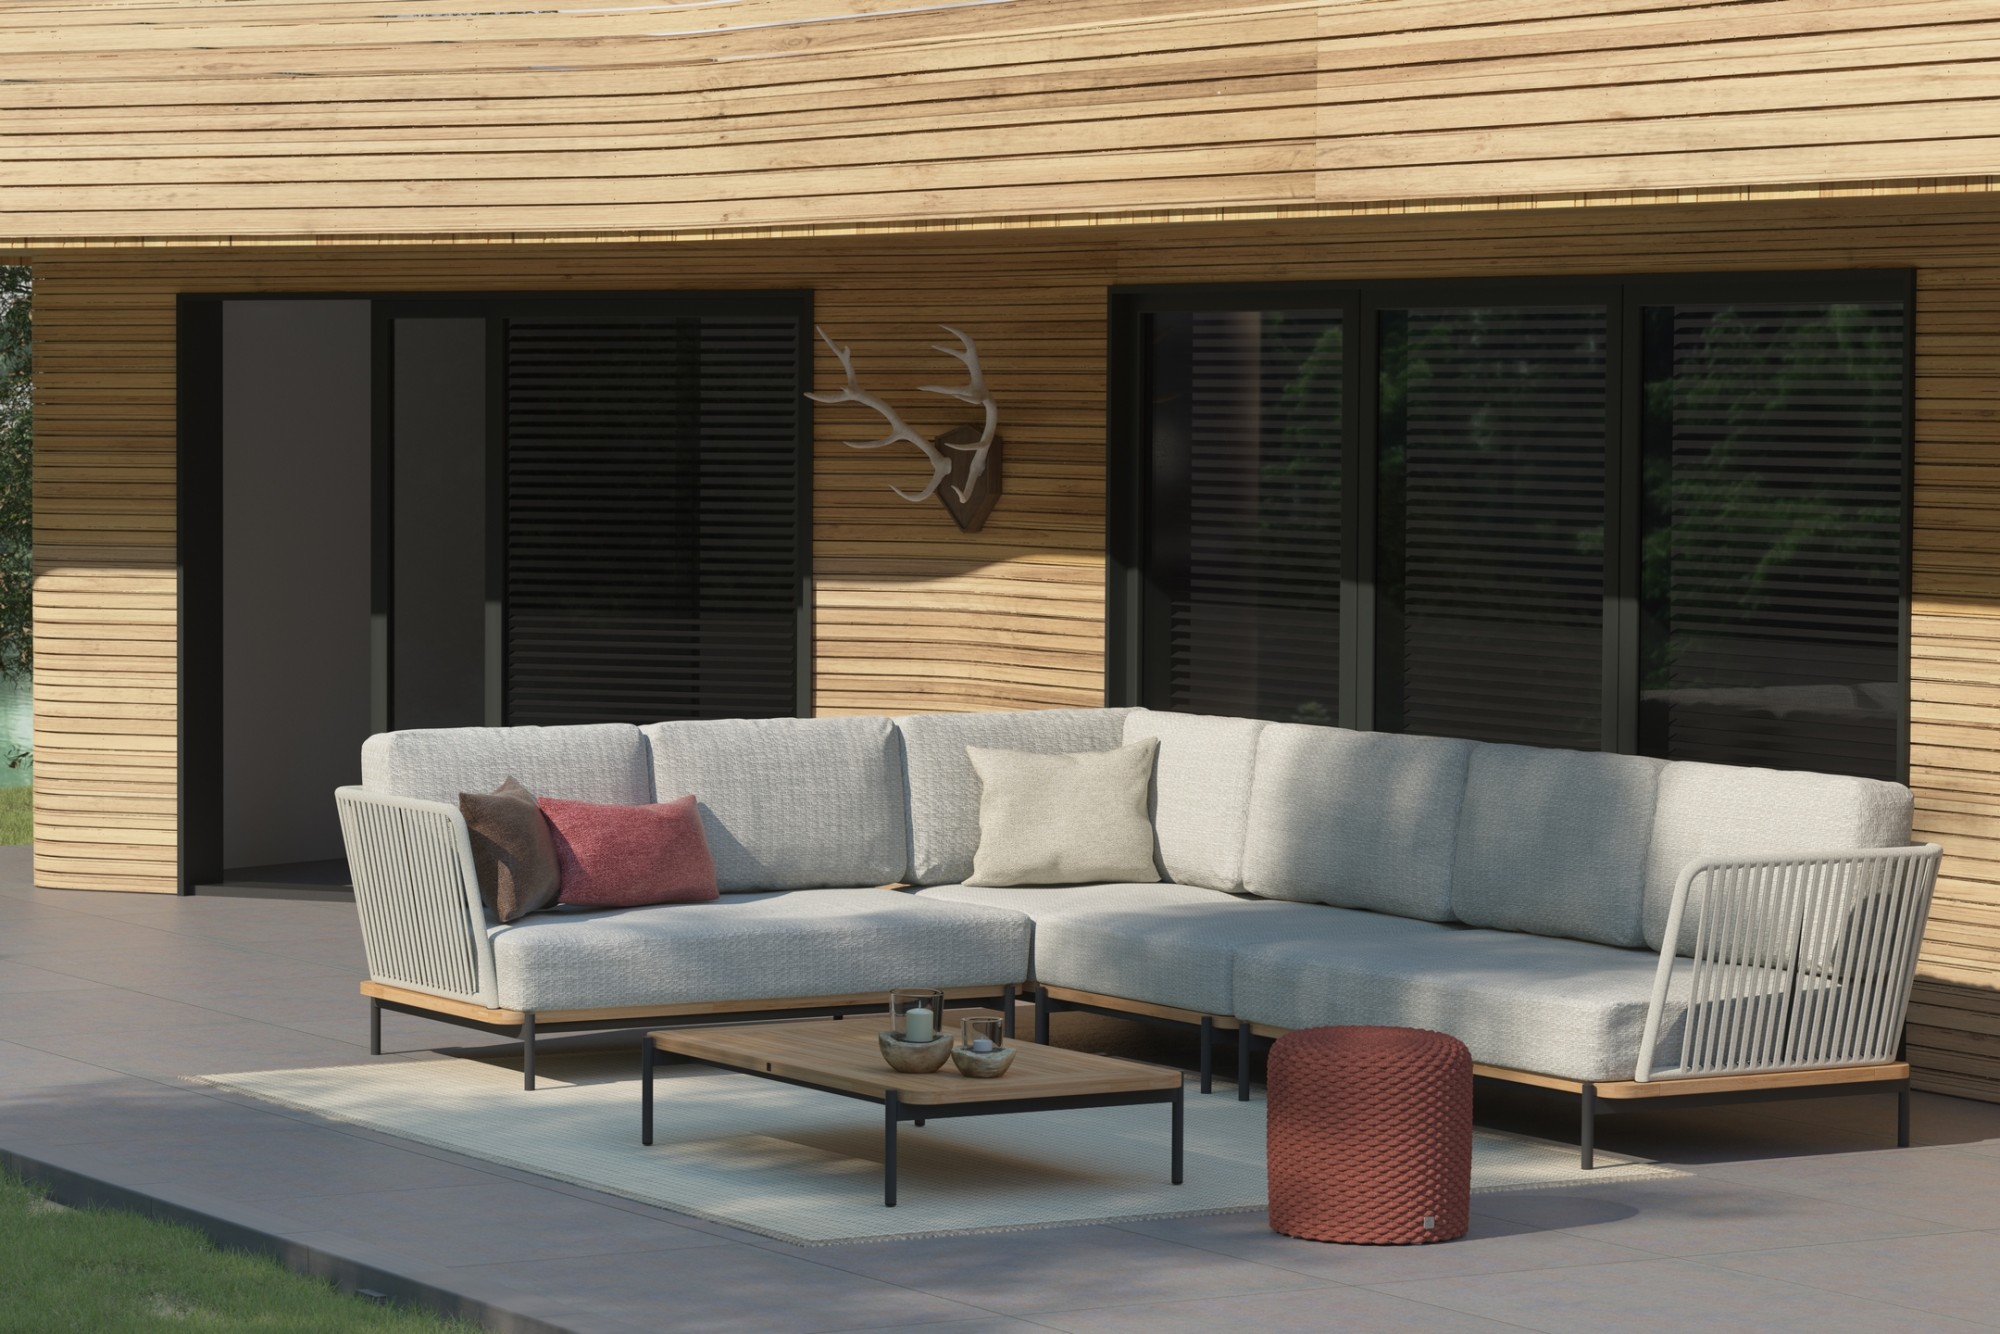 Castello_modular_lounge_set_with_Yoga_table_and_muffin_outdoor__01.jpg